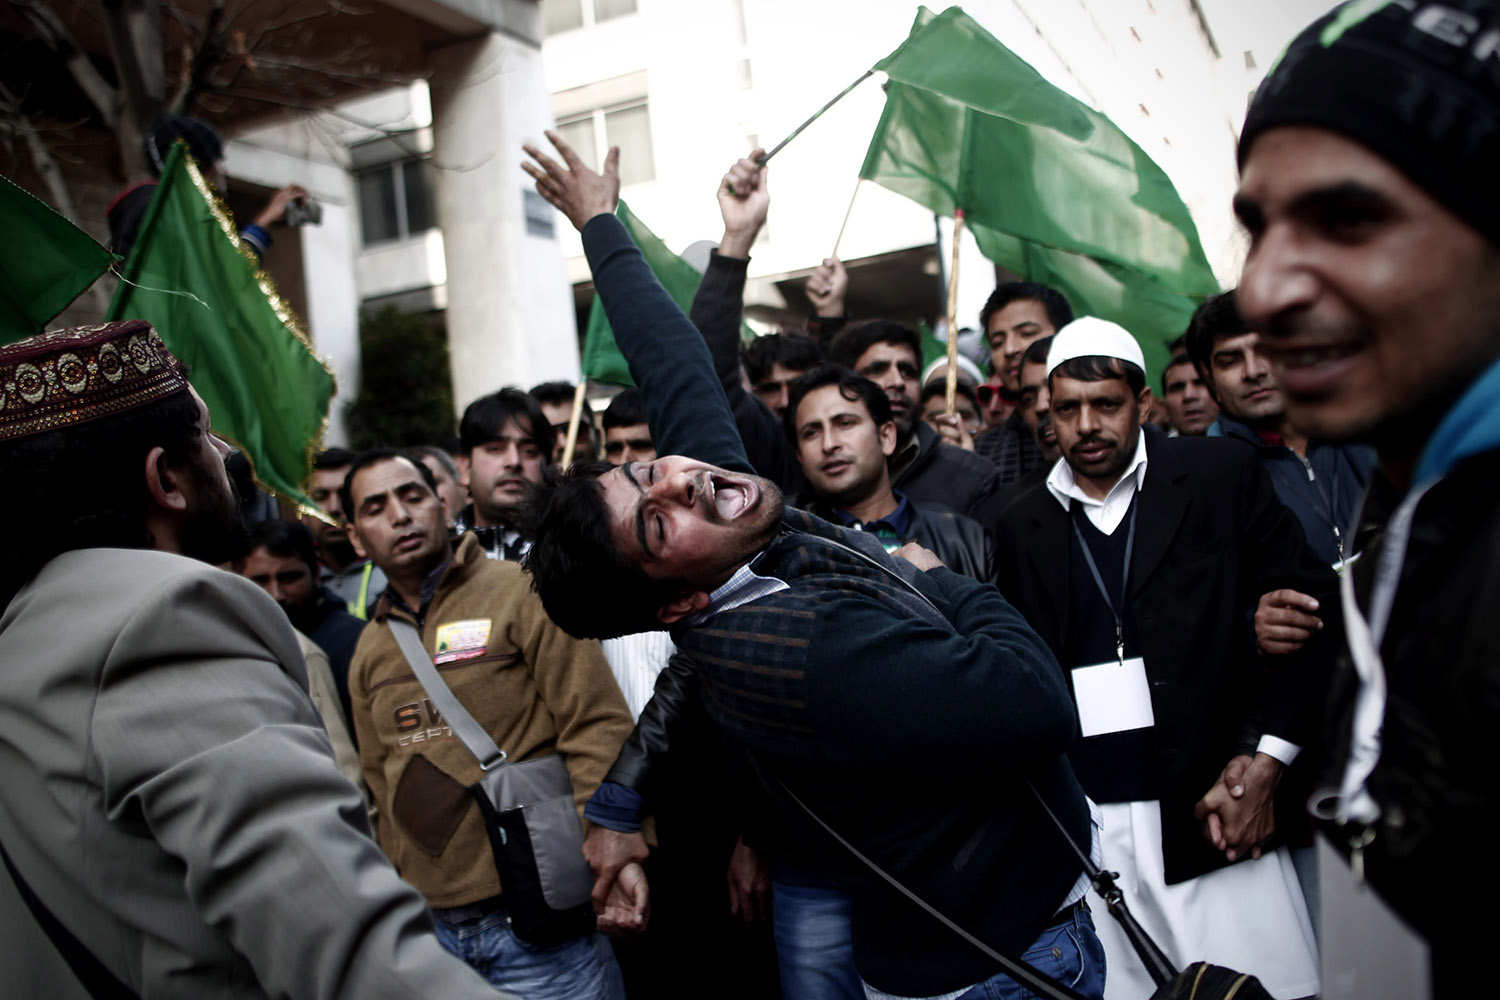 Jan. 19, 2014. Muslims living in Greece chant religious slogans during a celebration to commemorate the birth of Muslim's Prophet Muhammad (Mawlid), in Athens, Greece.